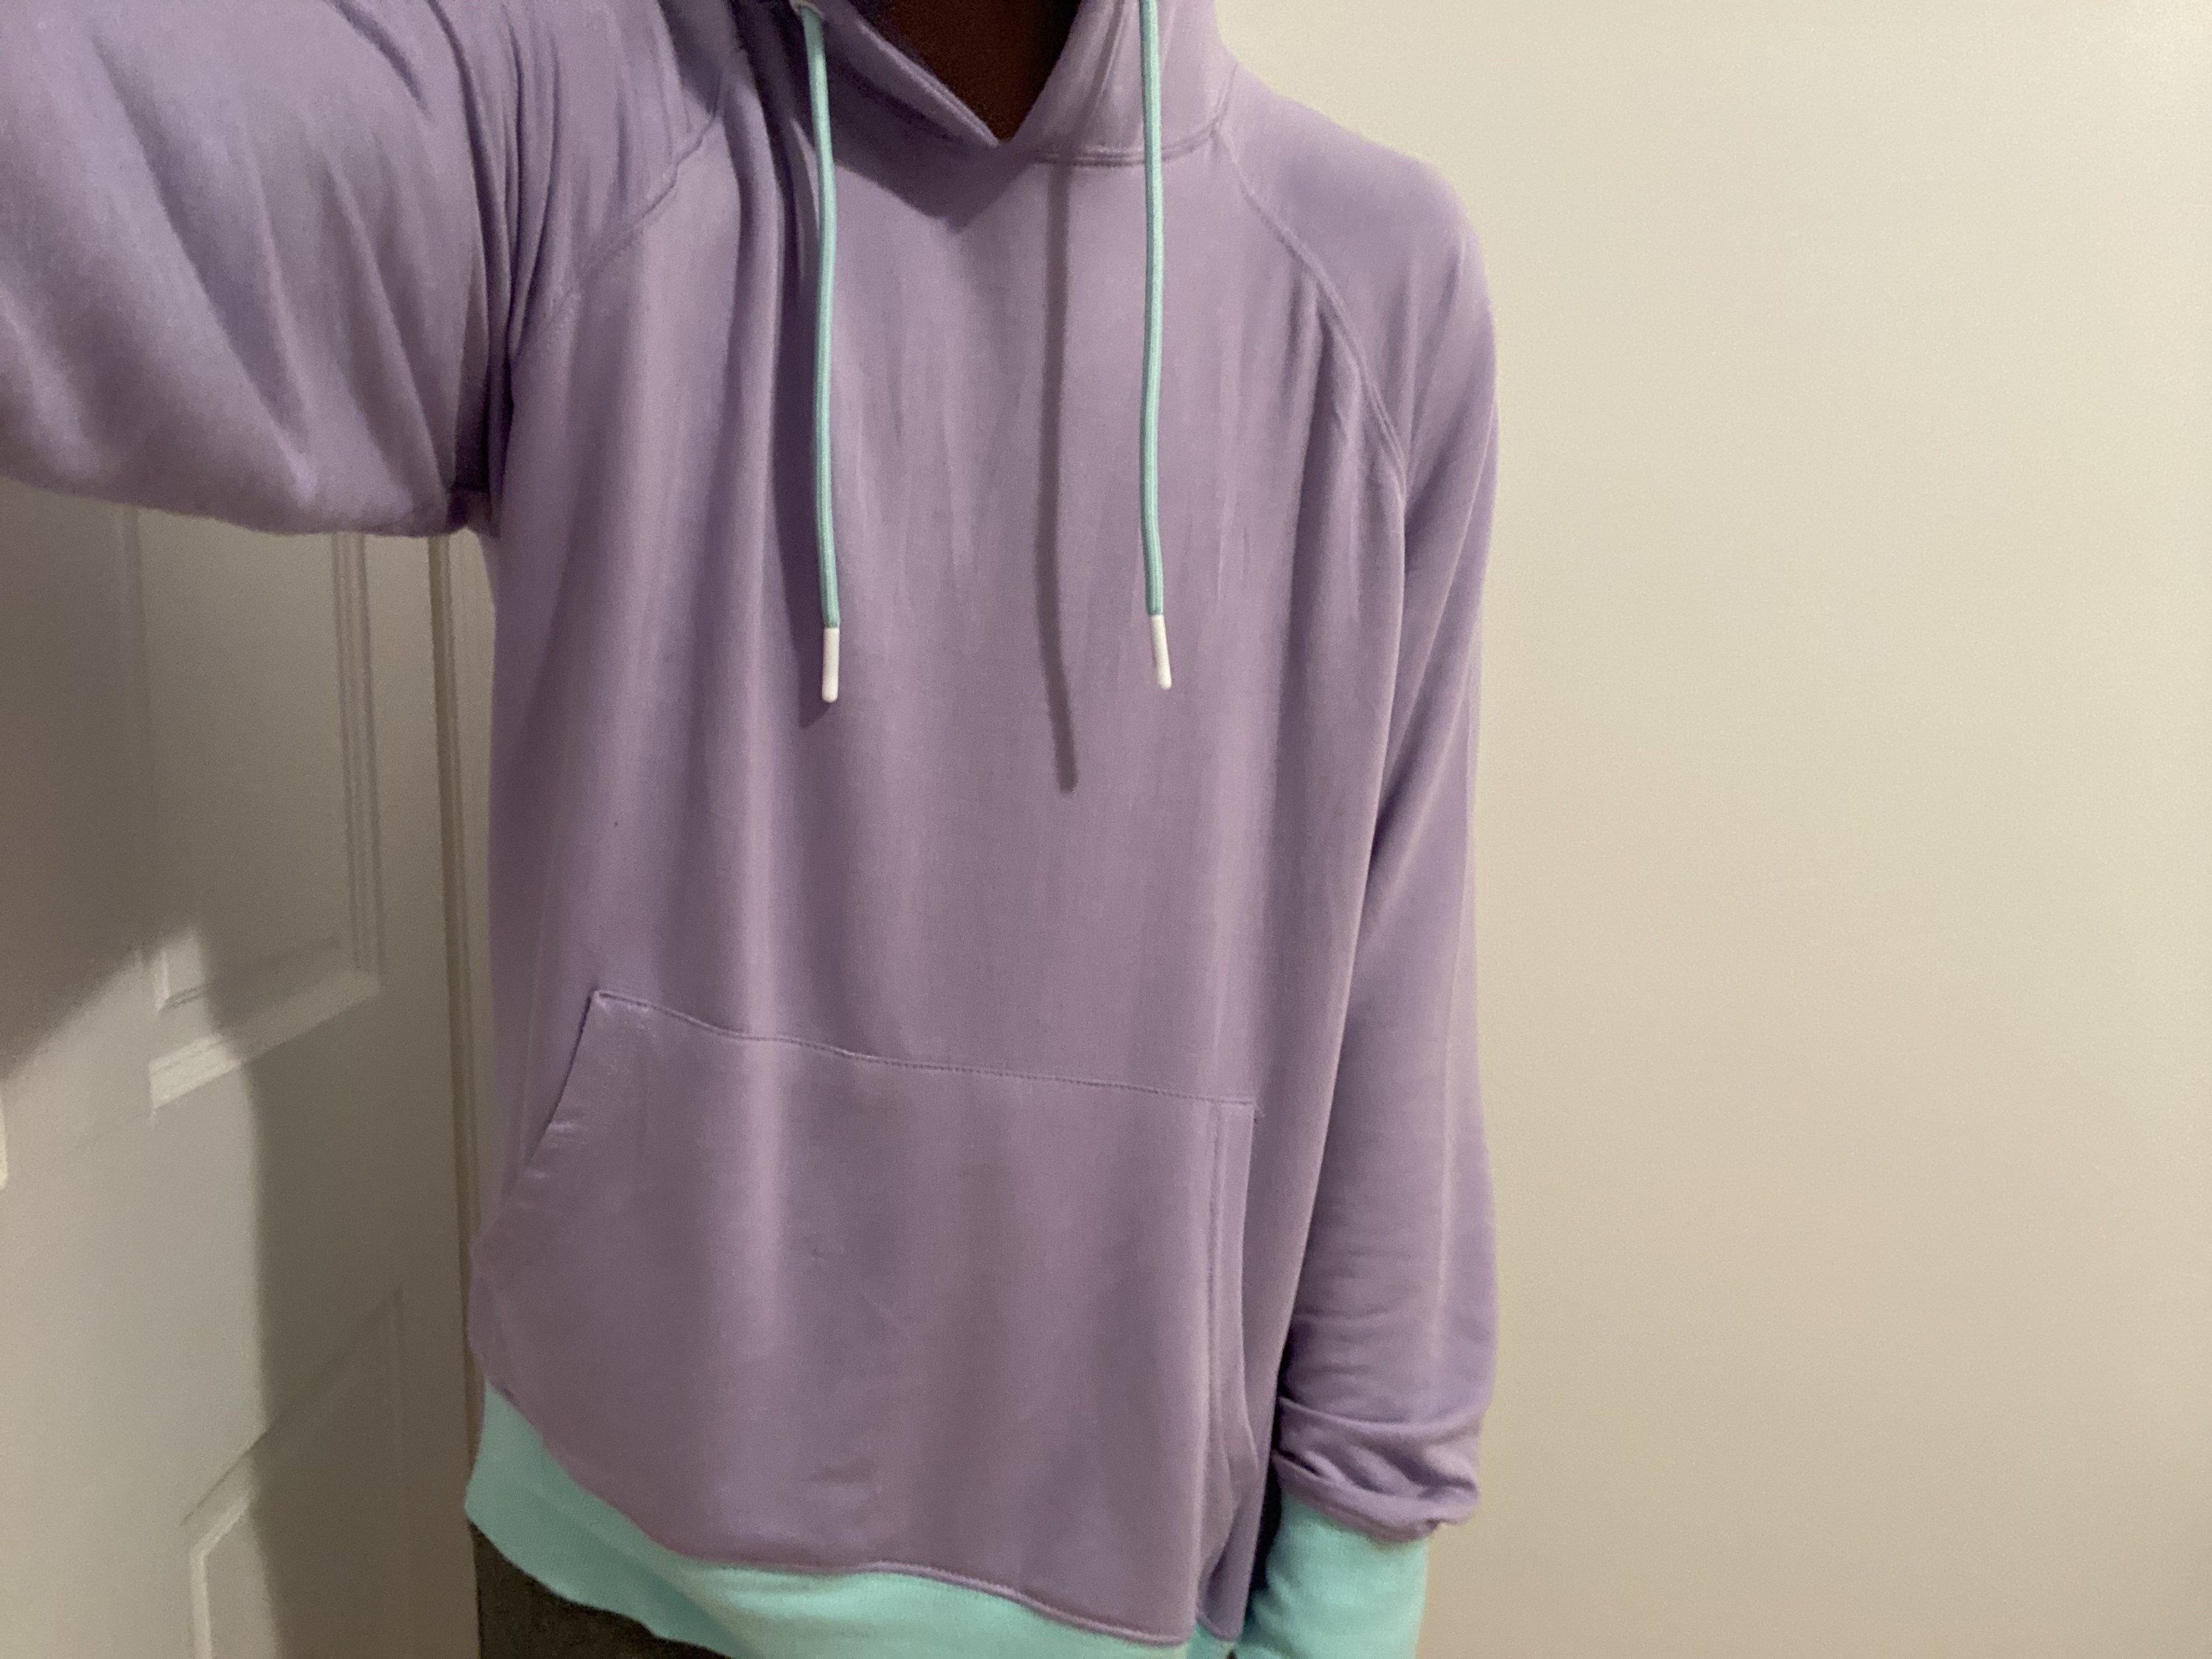 the author wearing the lavender and mint colored hoodie